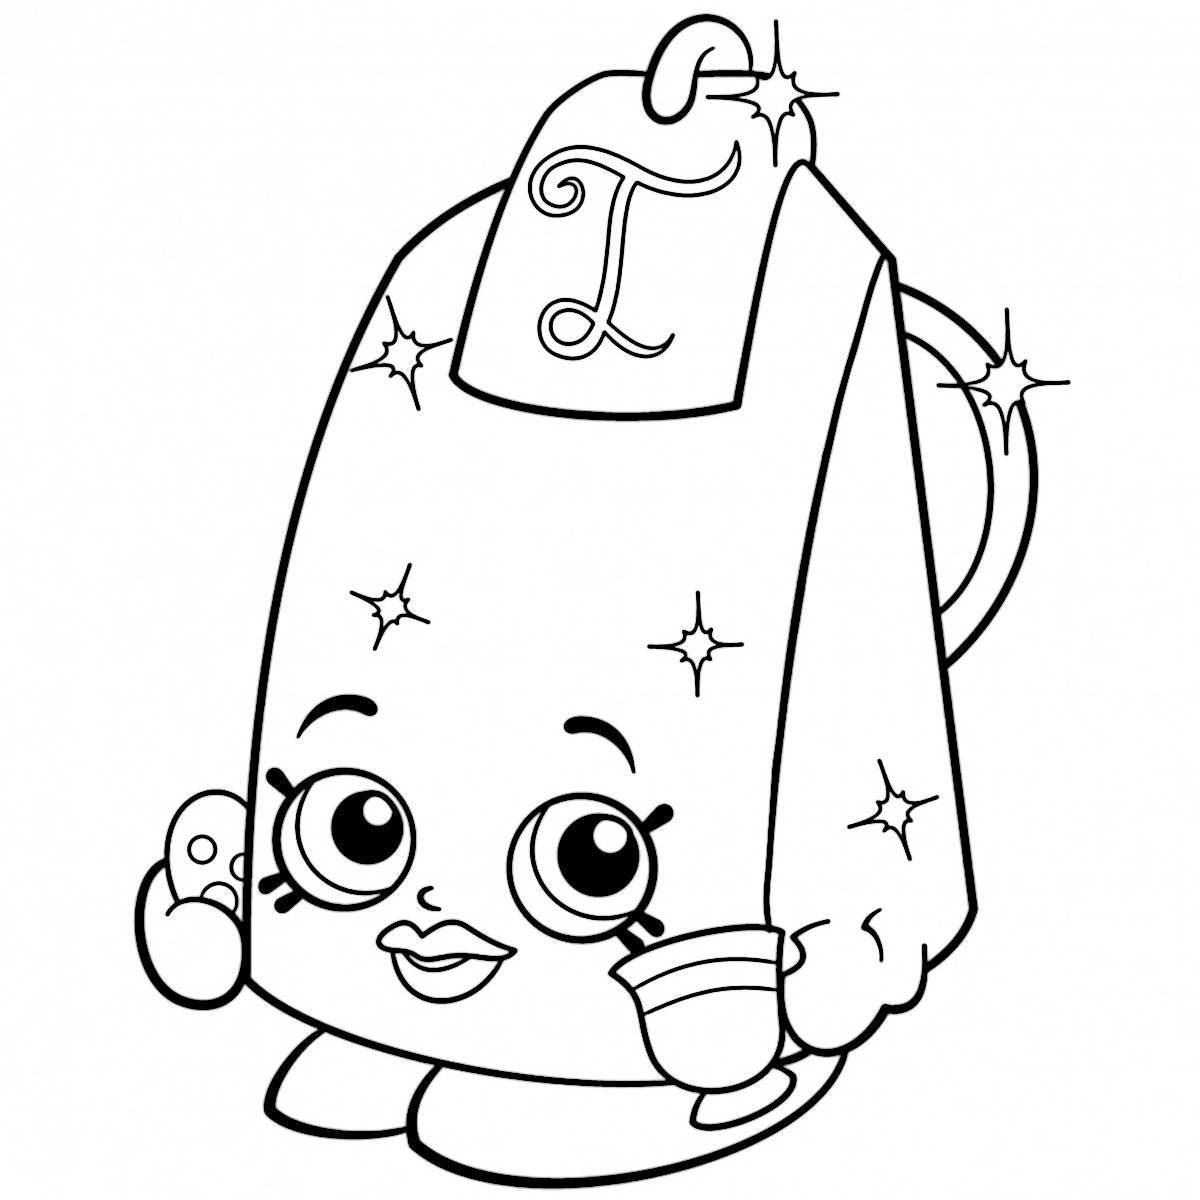 Shopkins fancy coloring pages for girls